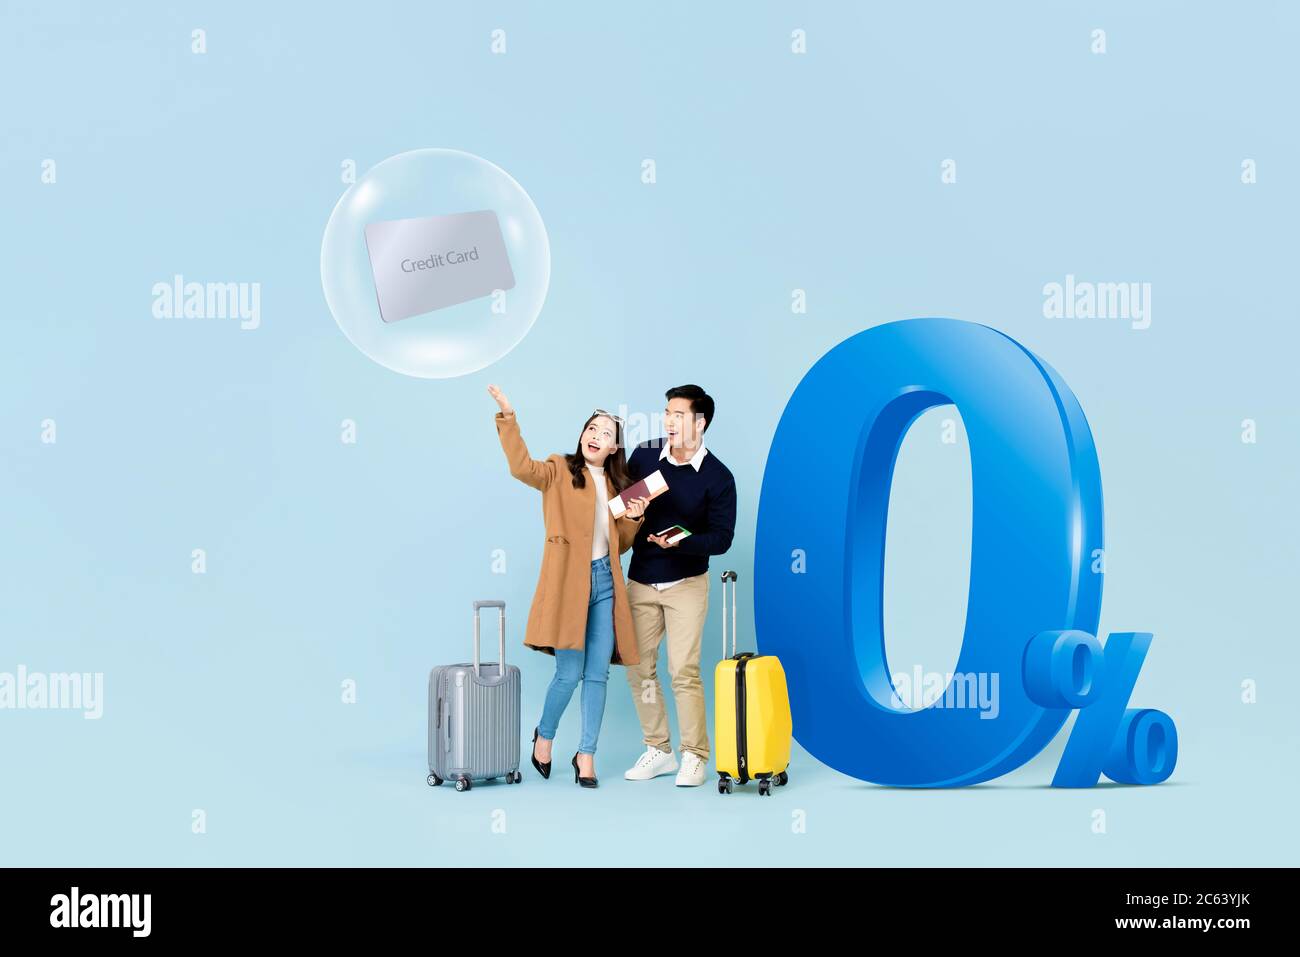 Young Asian couple tourists ready to fly with 0% installment payment credit card promotion Stock Photo